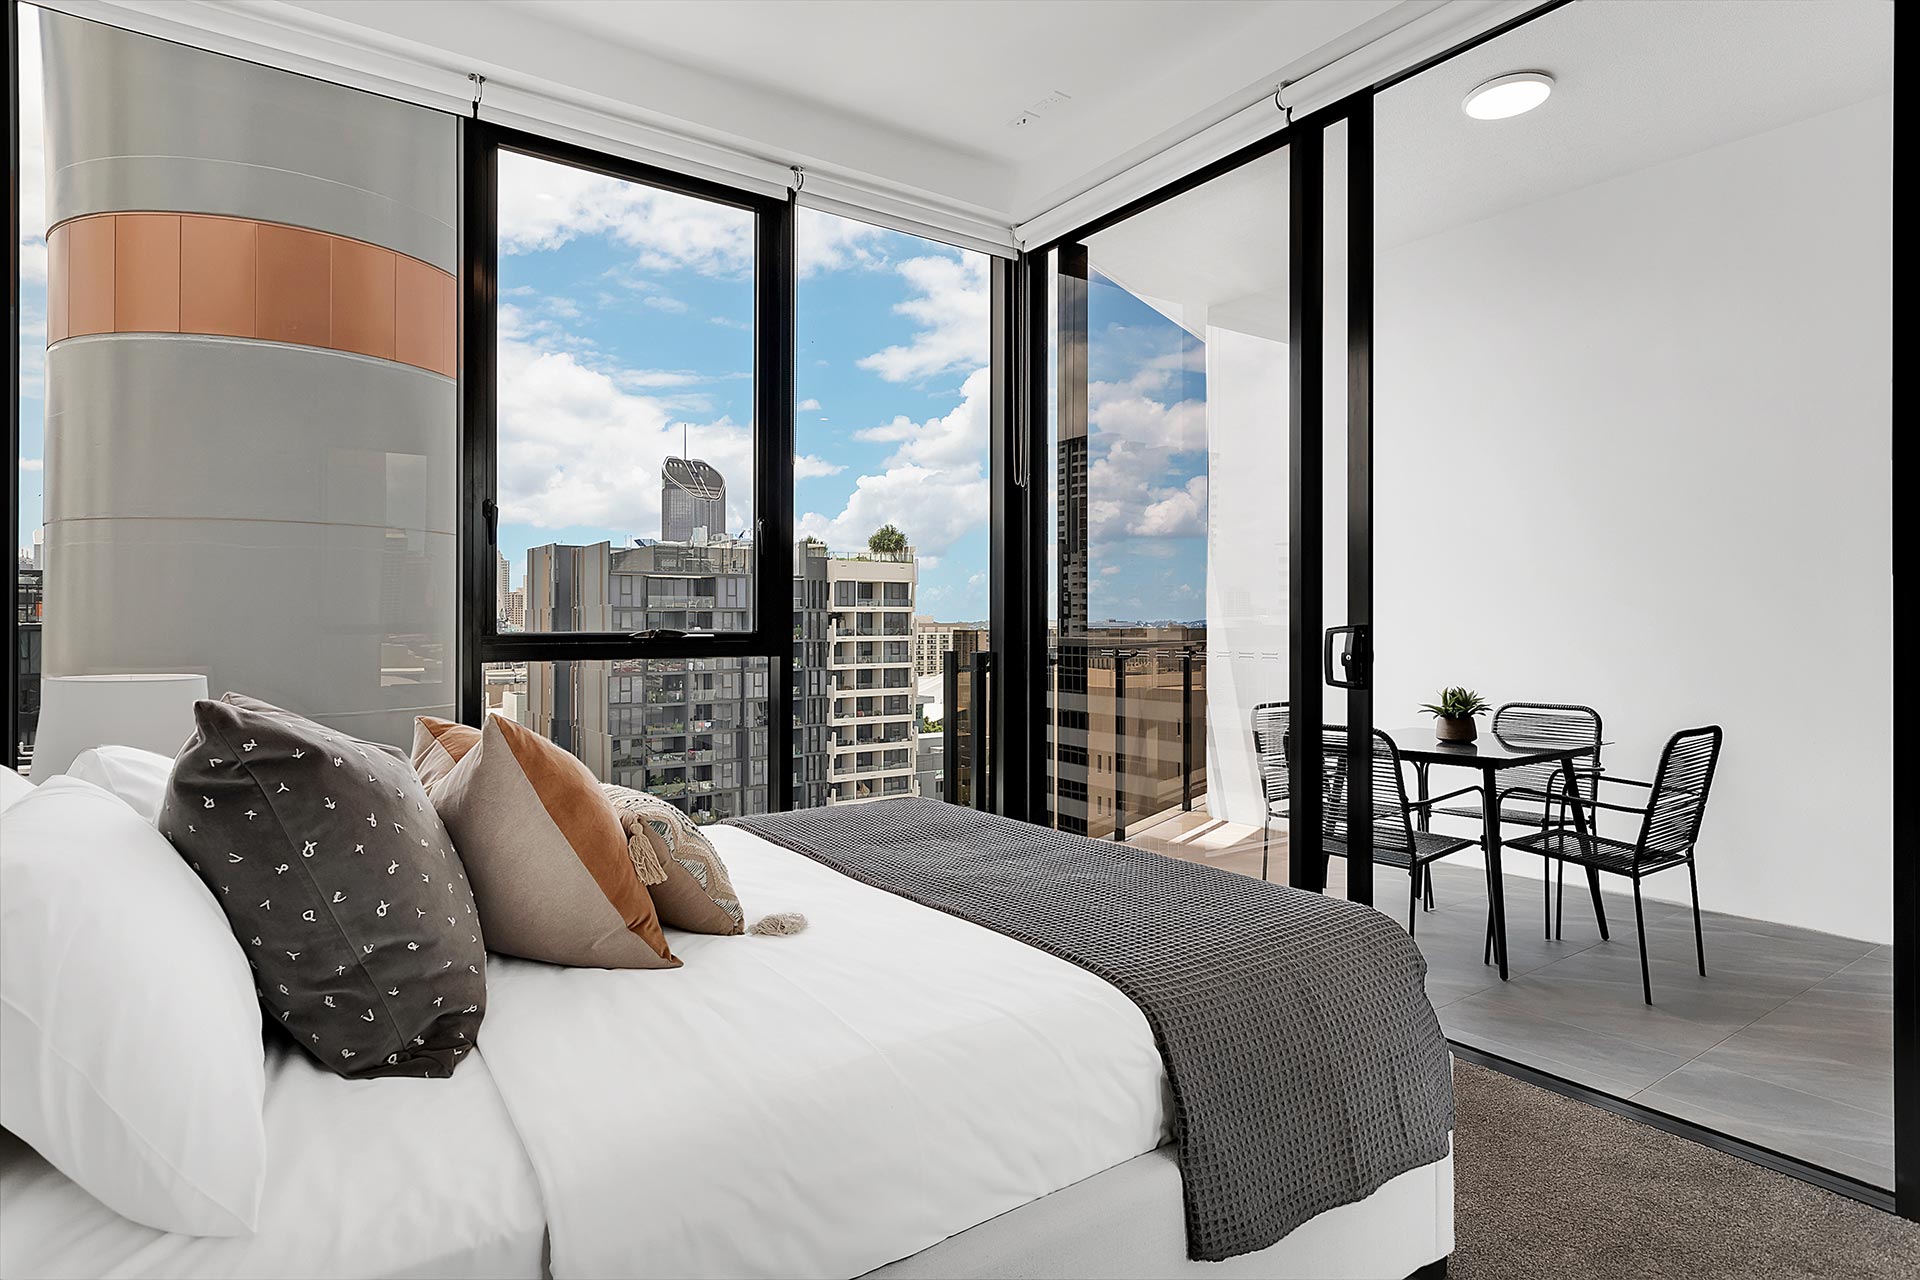 Bedroom - One Bedroom Apartment With Study - Urban Rest - Halo Apartments - Brisbane